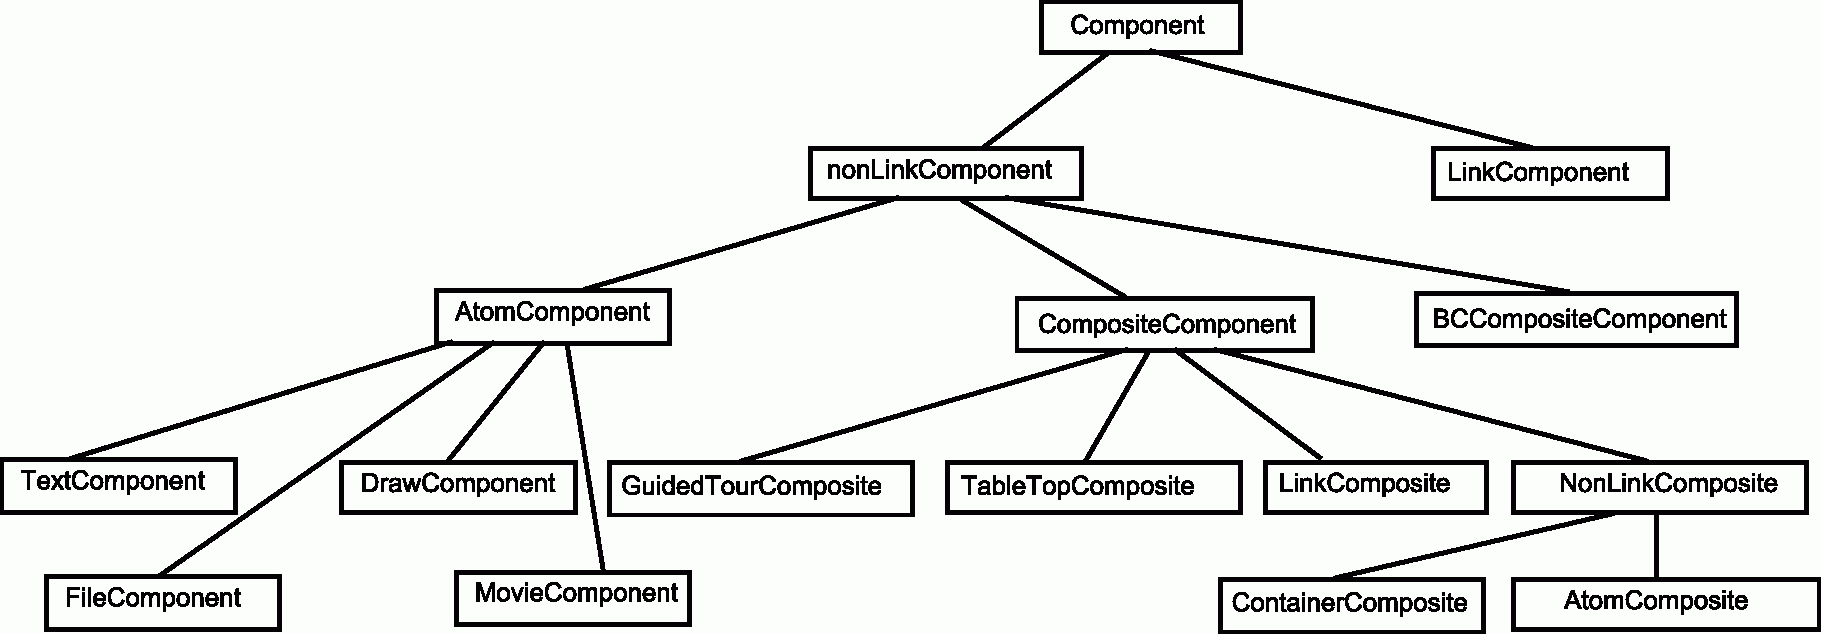 DHM components